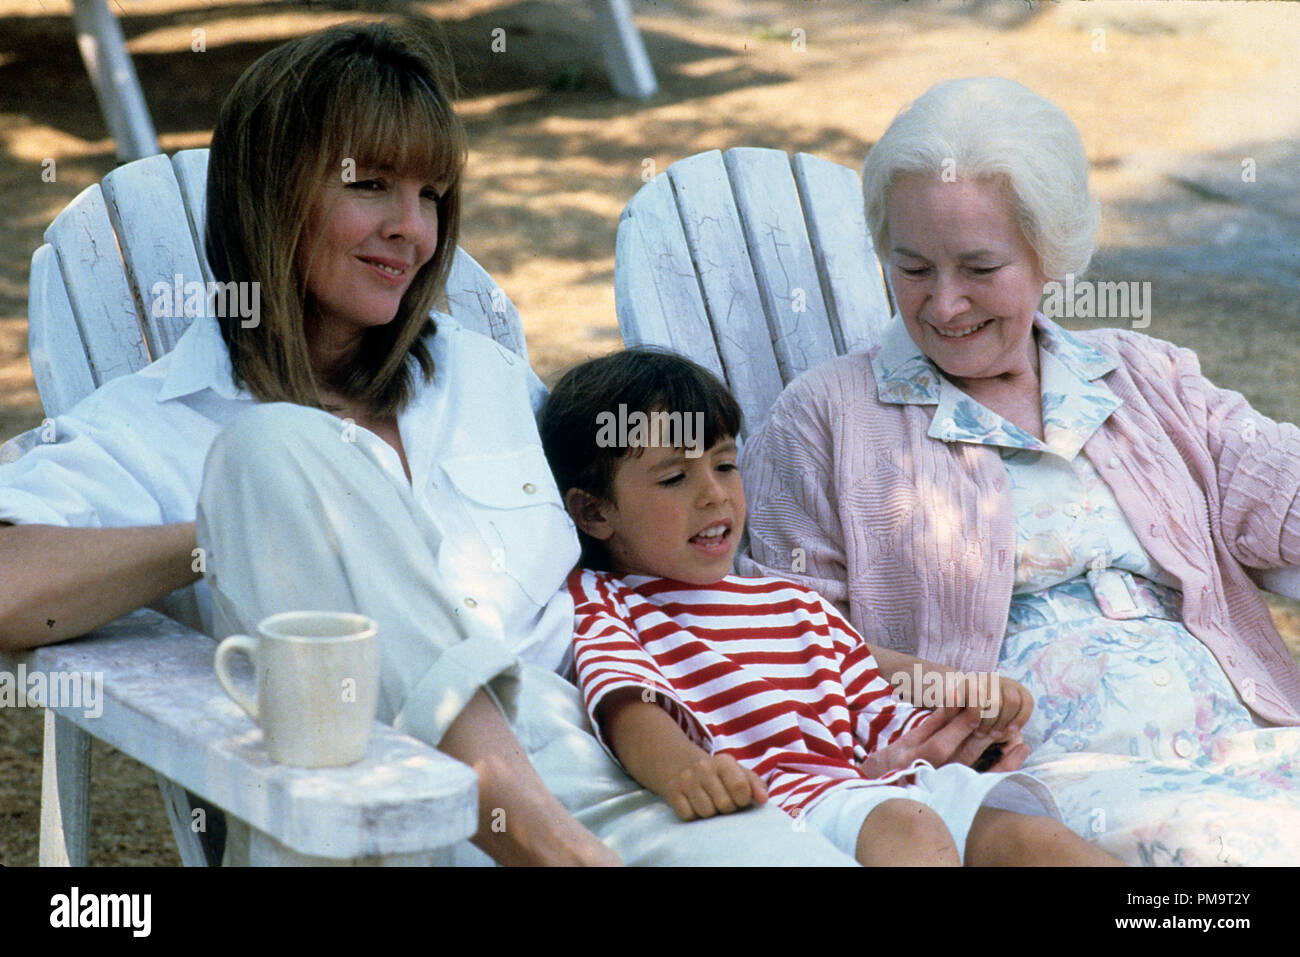 Studio Publicity Still from 'The Good Mother' Diane Keaton, Asia Vieira © 1988 Touchstone Pictures Photo Credit: John Williamson   All Rights Reserved   File Reference # 31694043THA  For Editorial Use Only Stock Photo